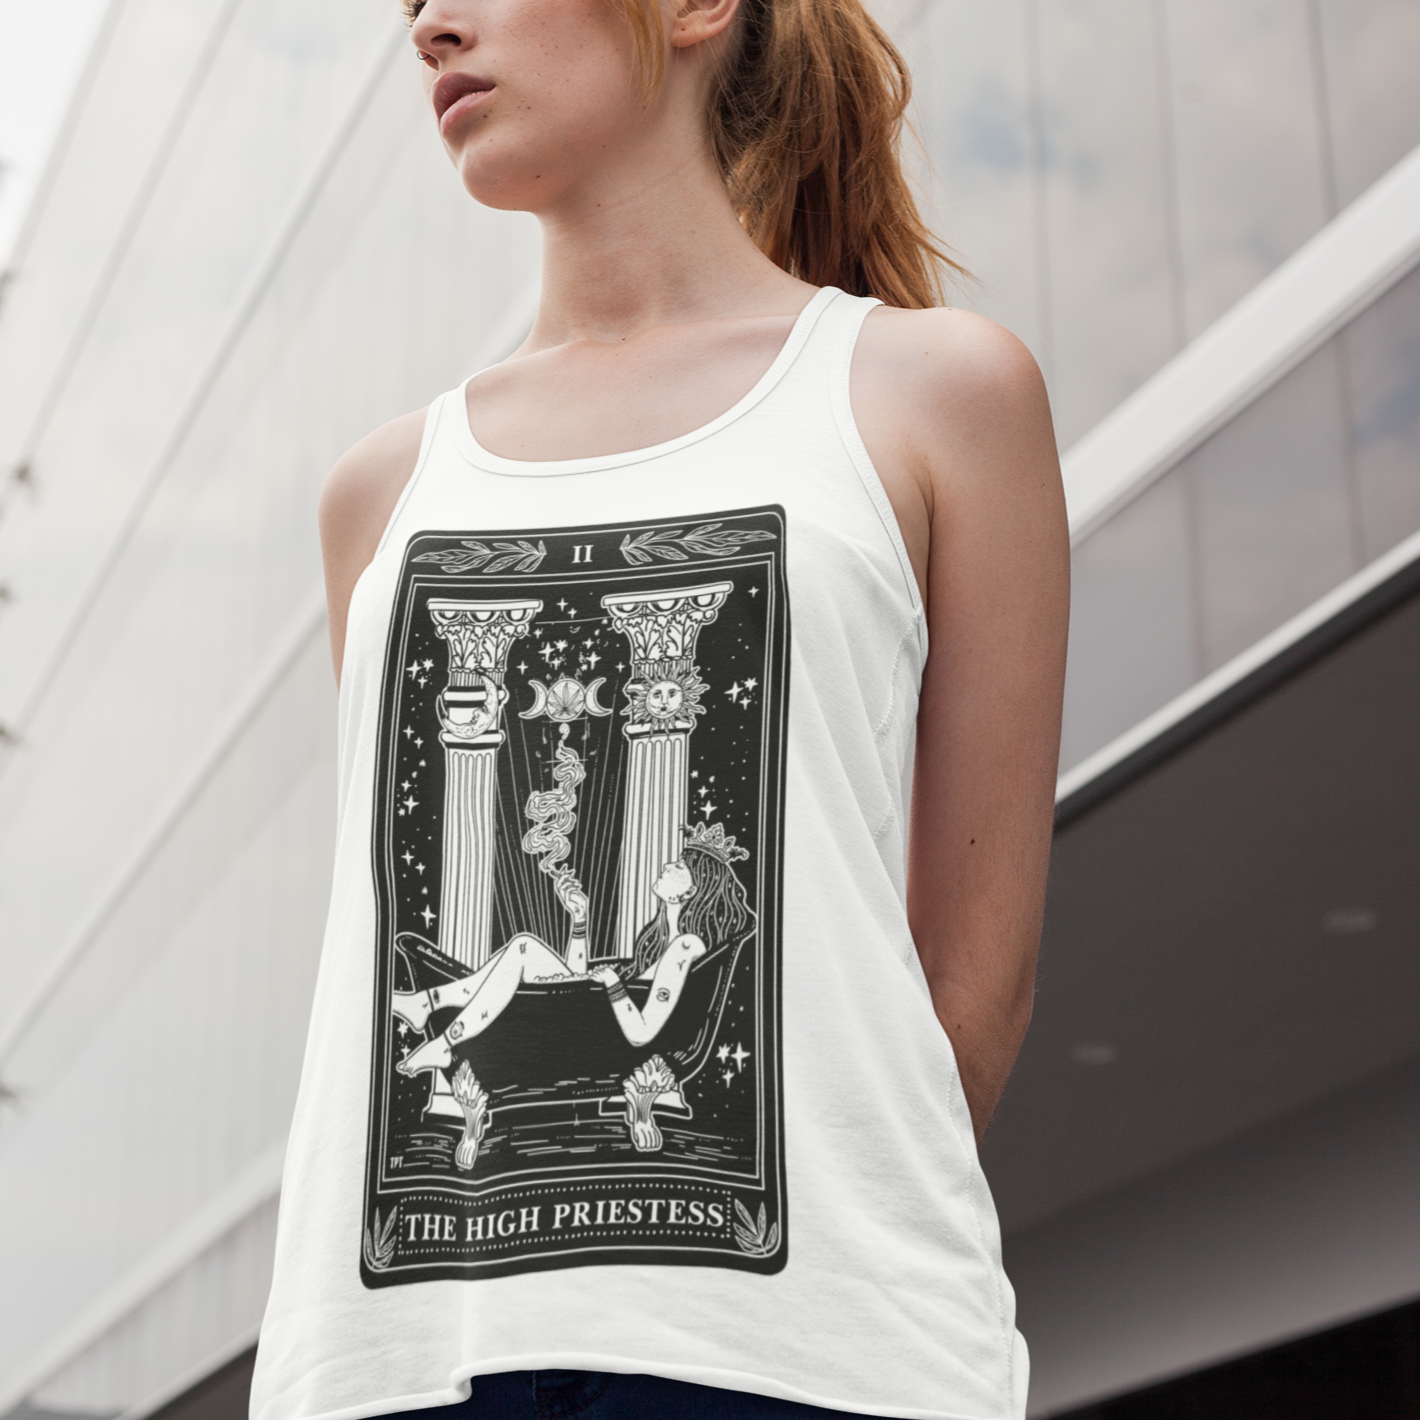 « THE HIGH PRIESTESS » WOMEN'S SLOUCHY or RACERBACK TANK